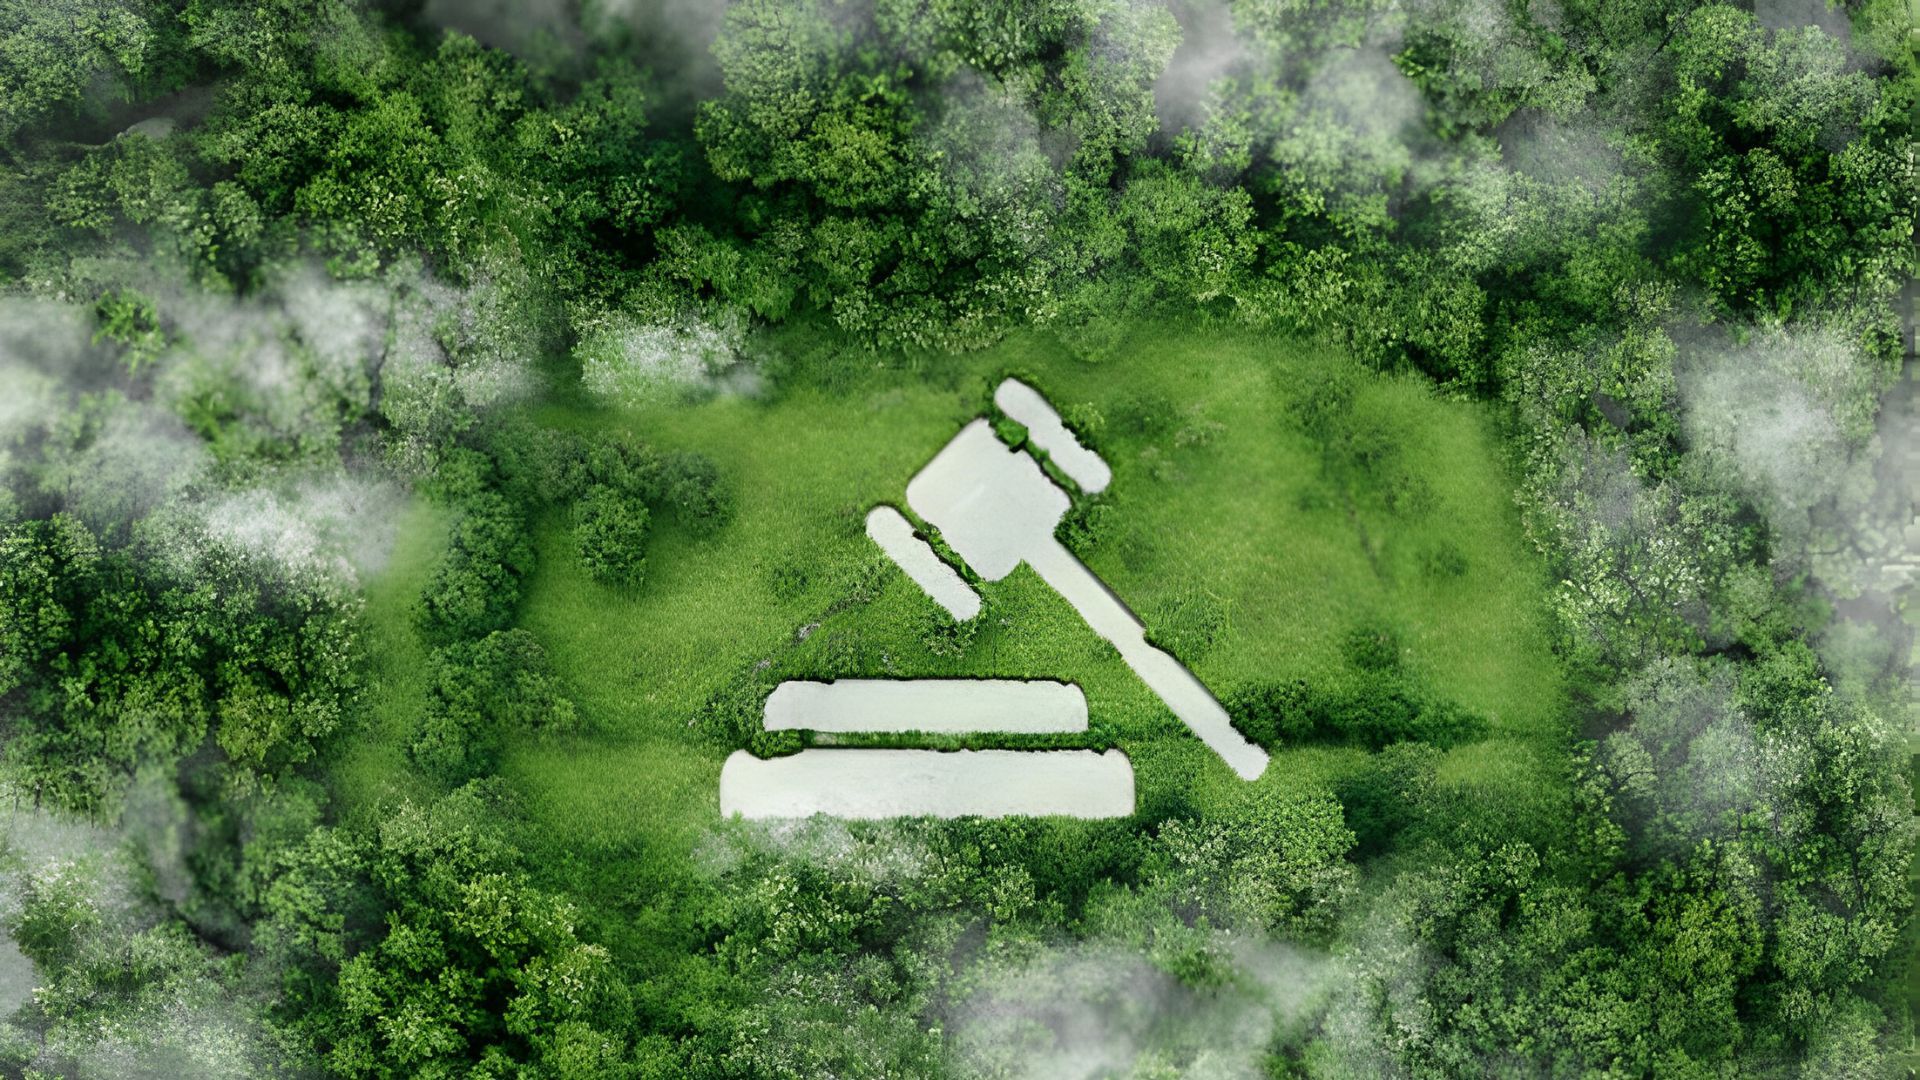 Green Law: Preserving the Environment